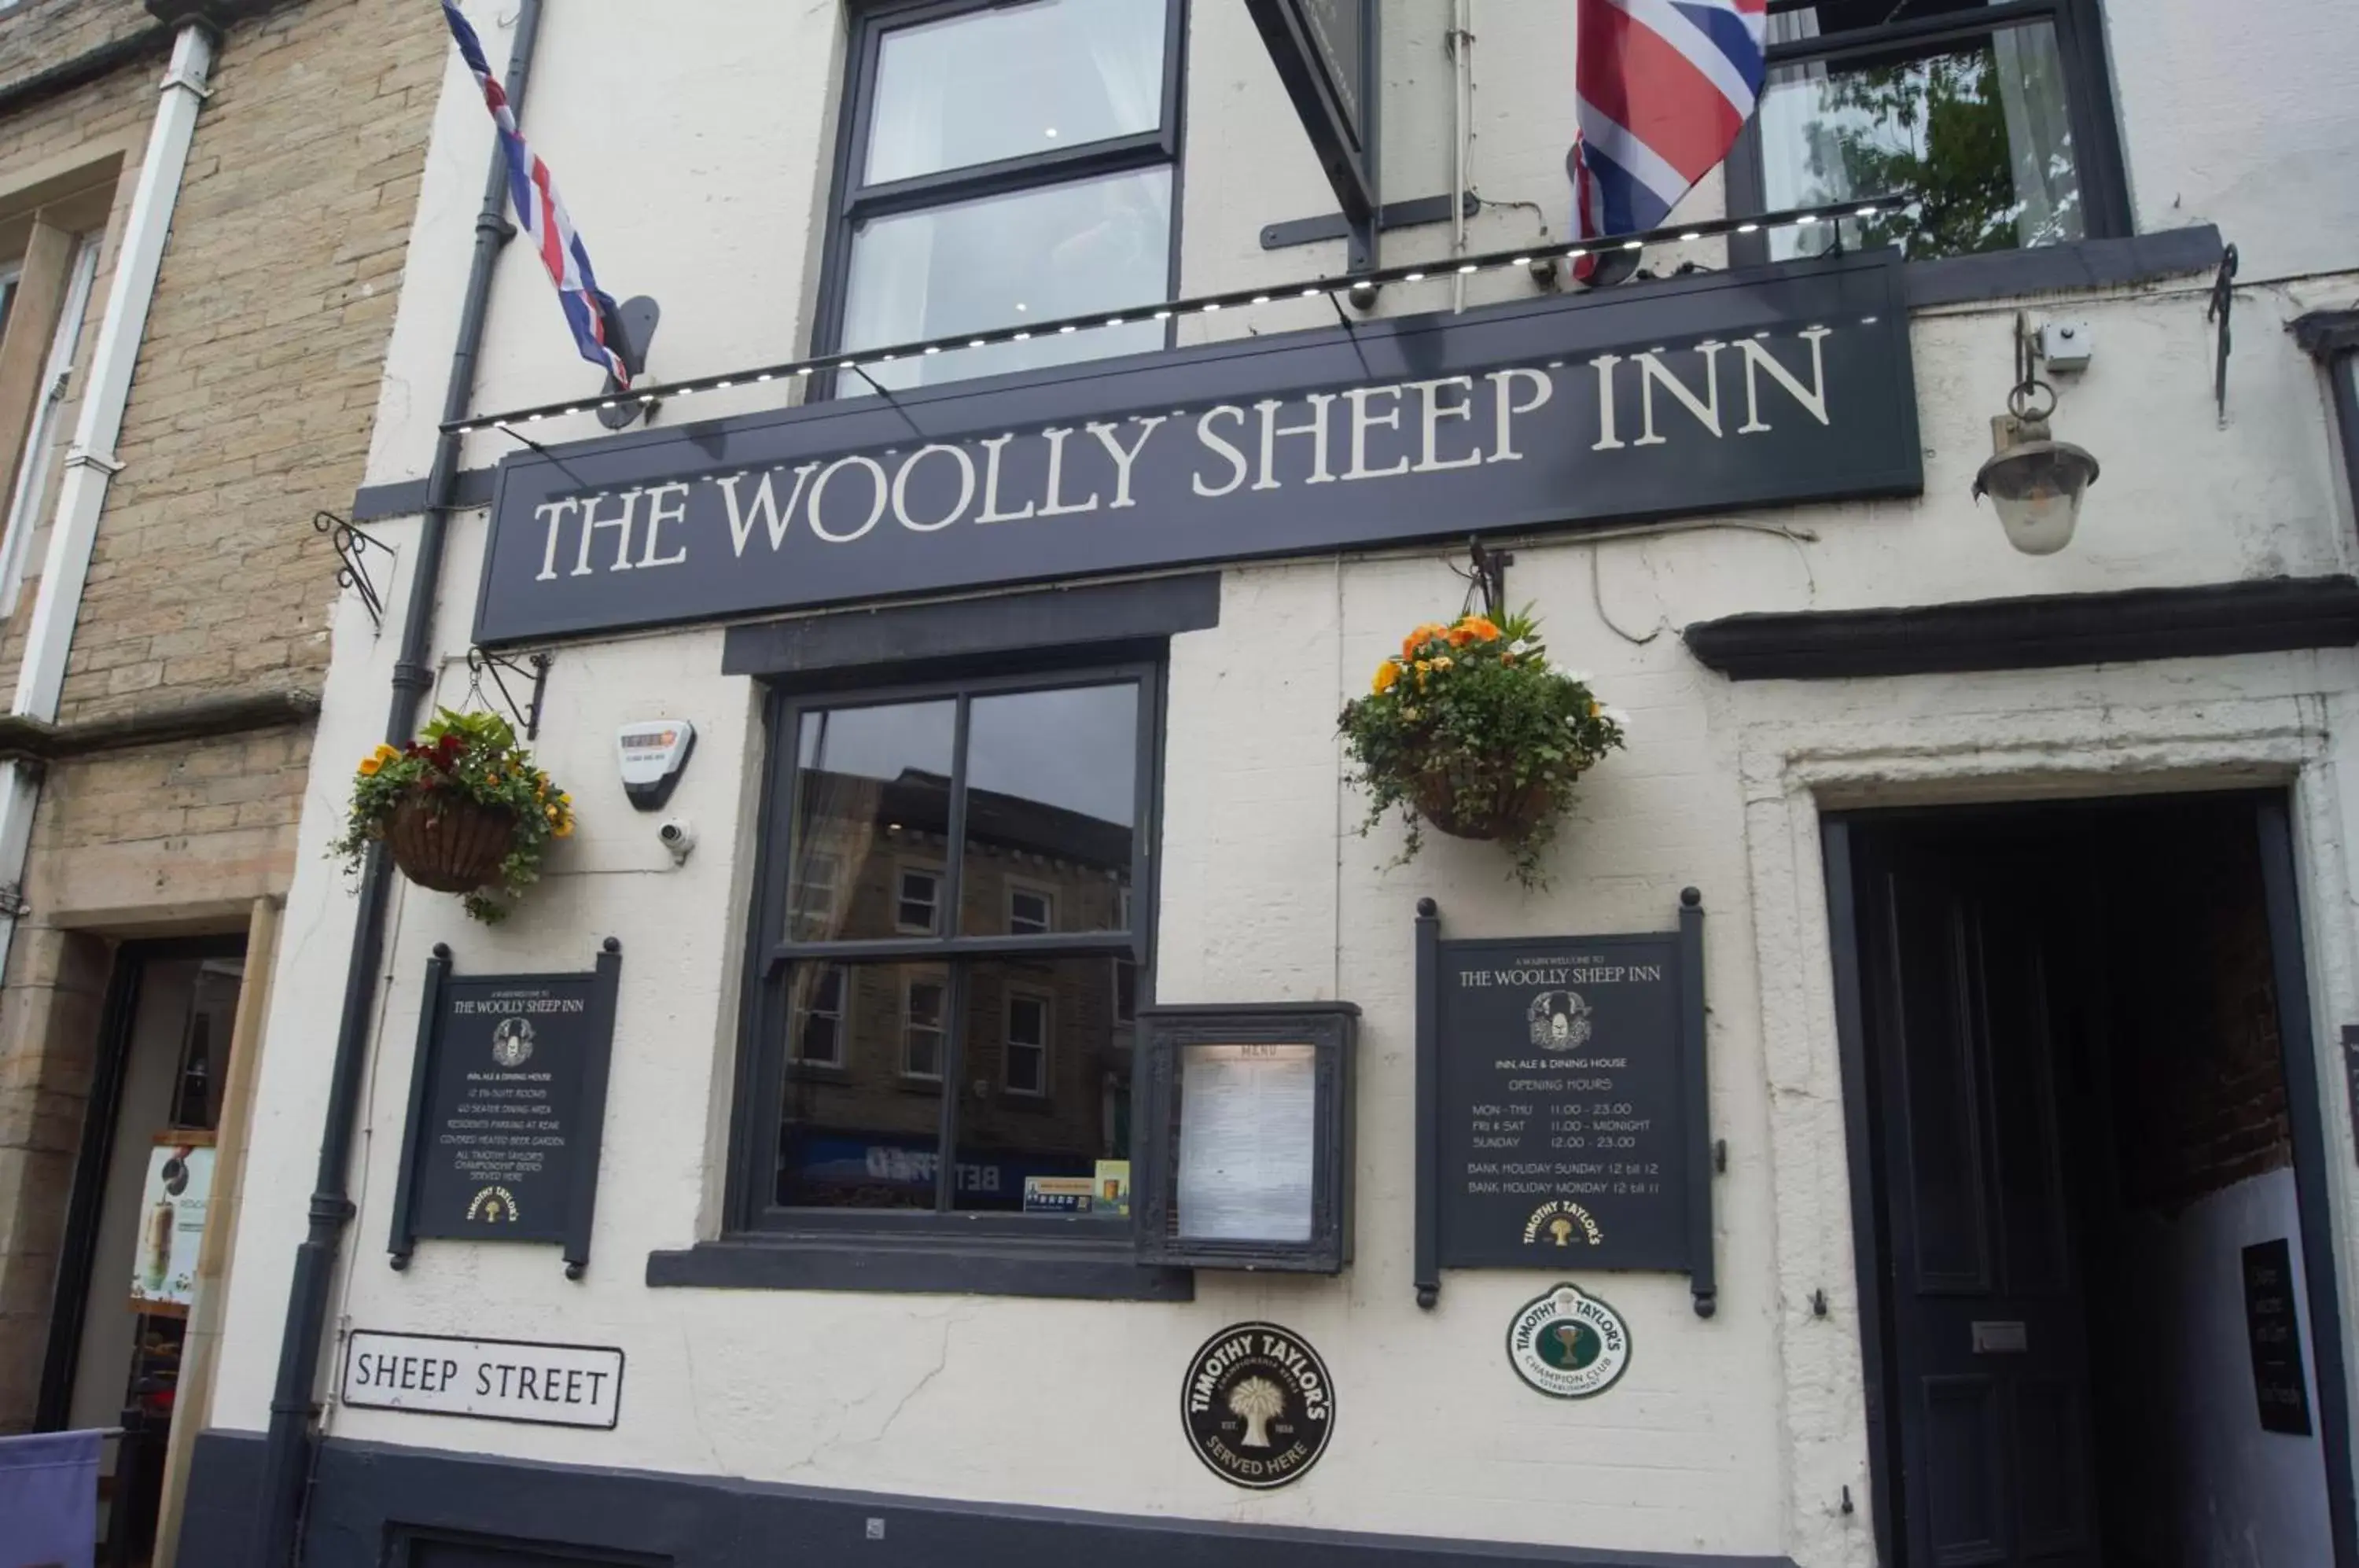 Property logo or sign in The Woolly Sheep Inn